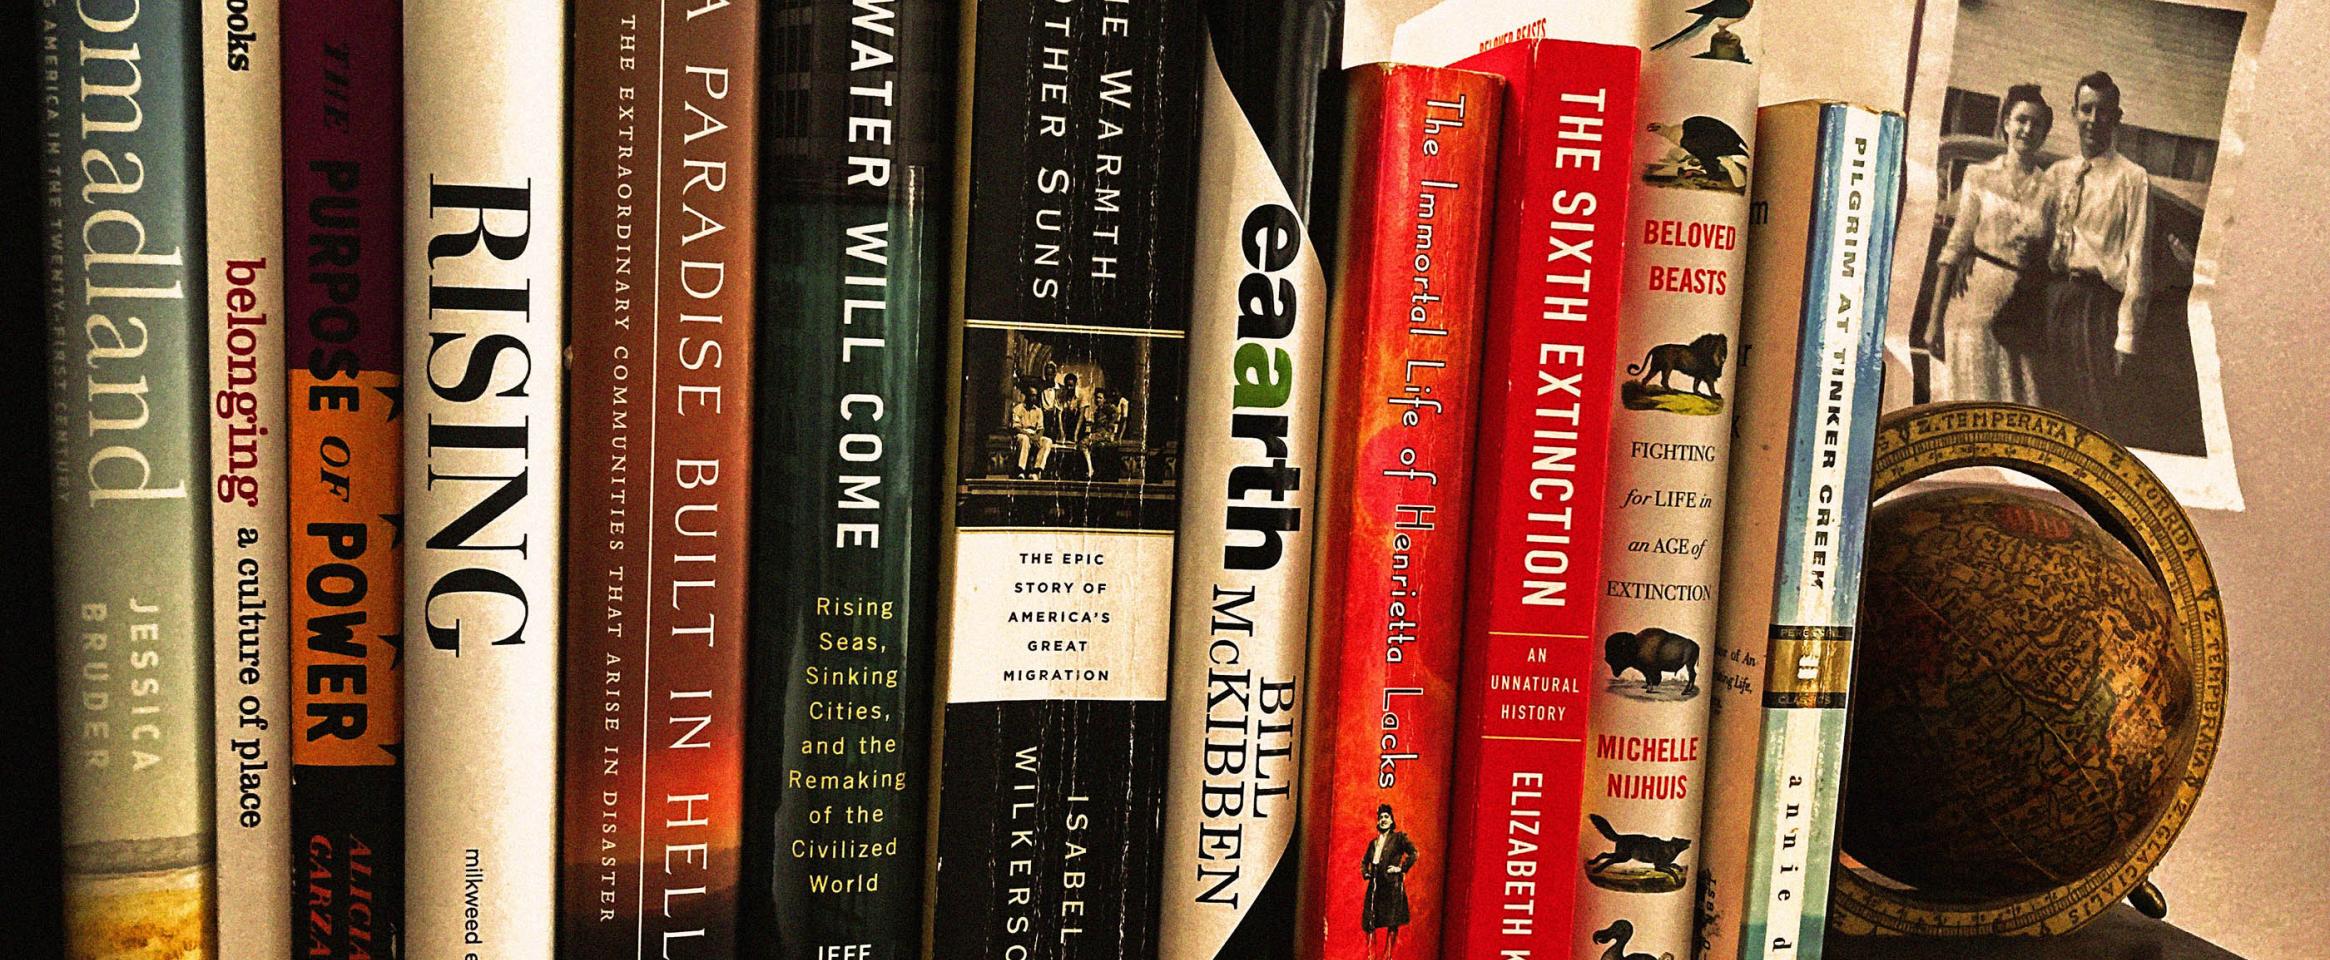 Rectangular photo of a row of books on a wooden bookshelf, with many titles related to the earth, environment, and science. A bookend with an antique globe, and a monochrome vintage photo of a couple are visible adjacent.